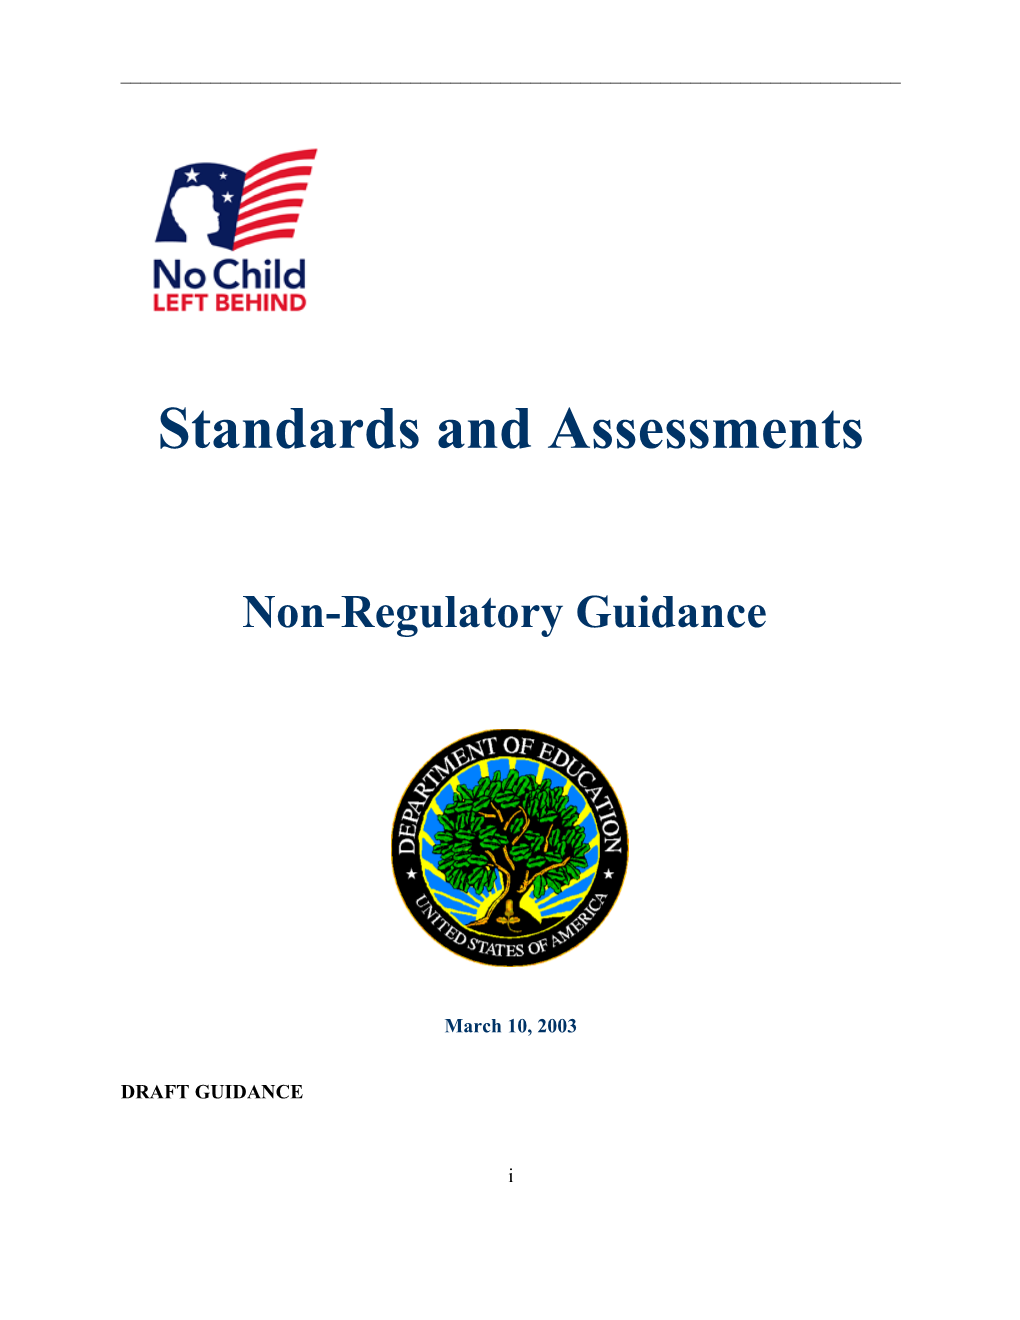 Standards and Assessments Non-Regulatory Guidance (MS WORD)